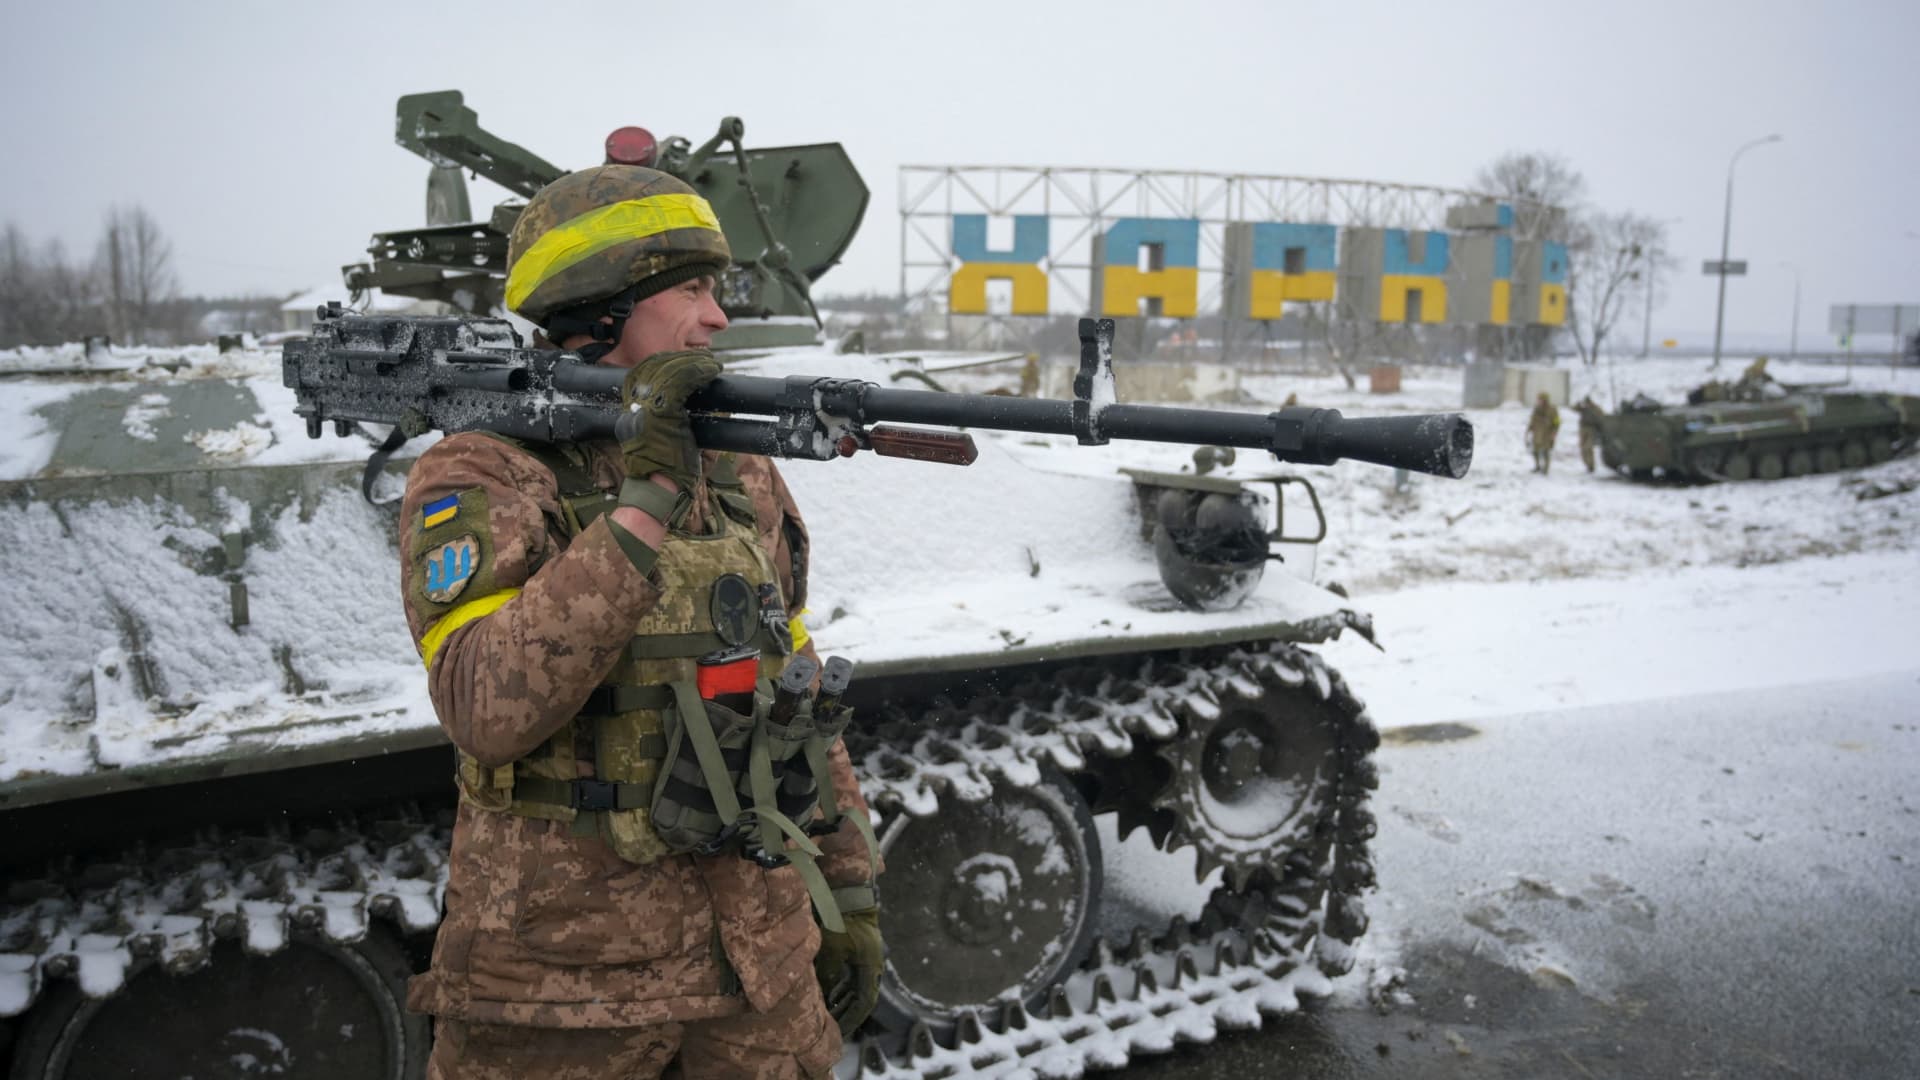 A Ukrainian serviceman reacts while holding a weapon in Kharkiv, Ukraine February 25, 2022.